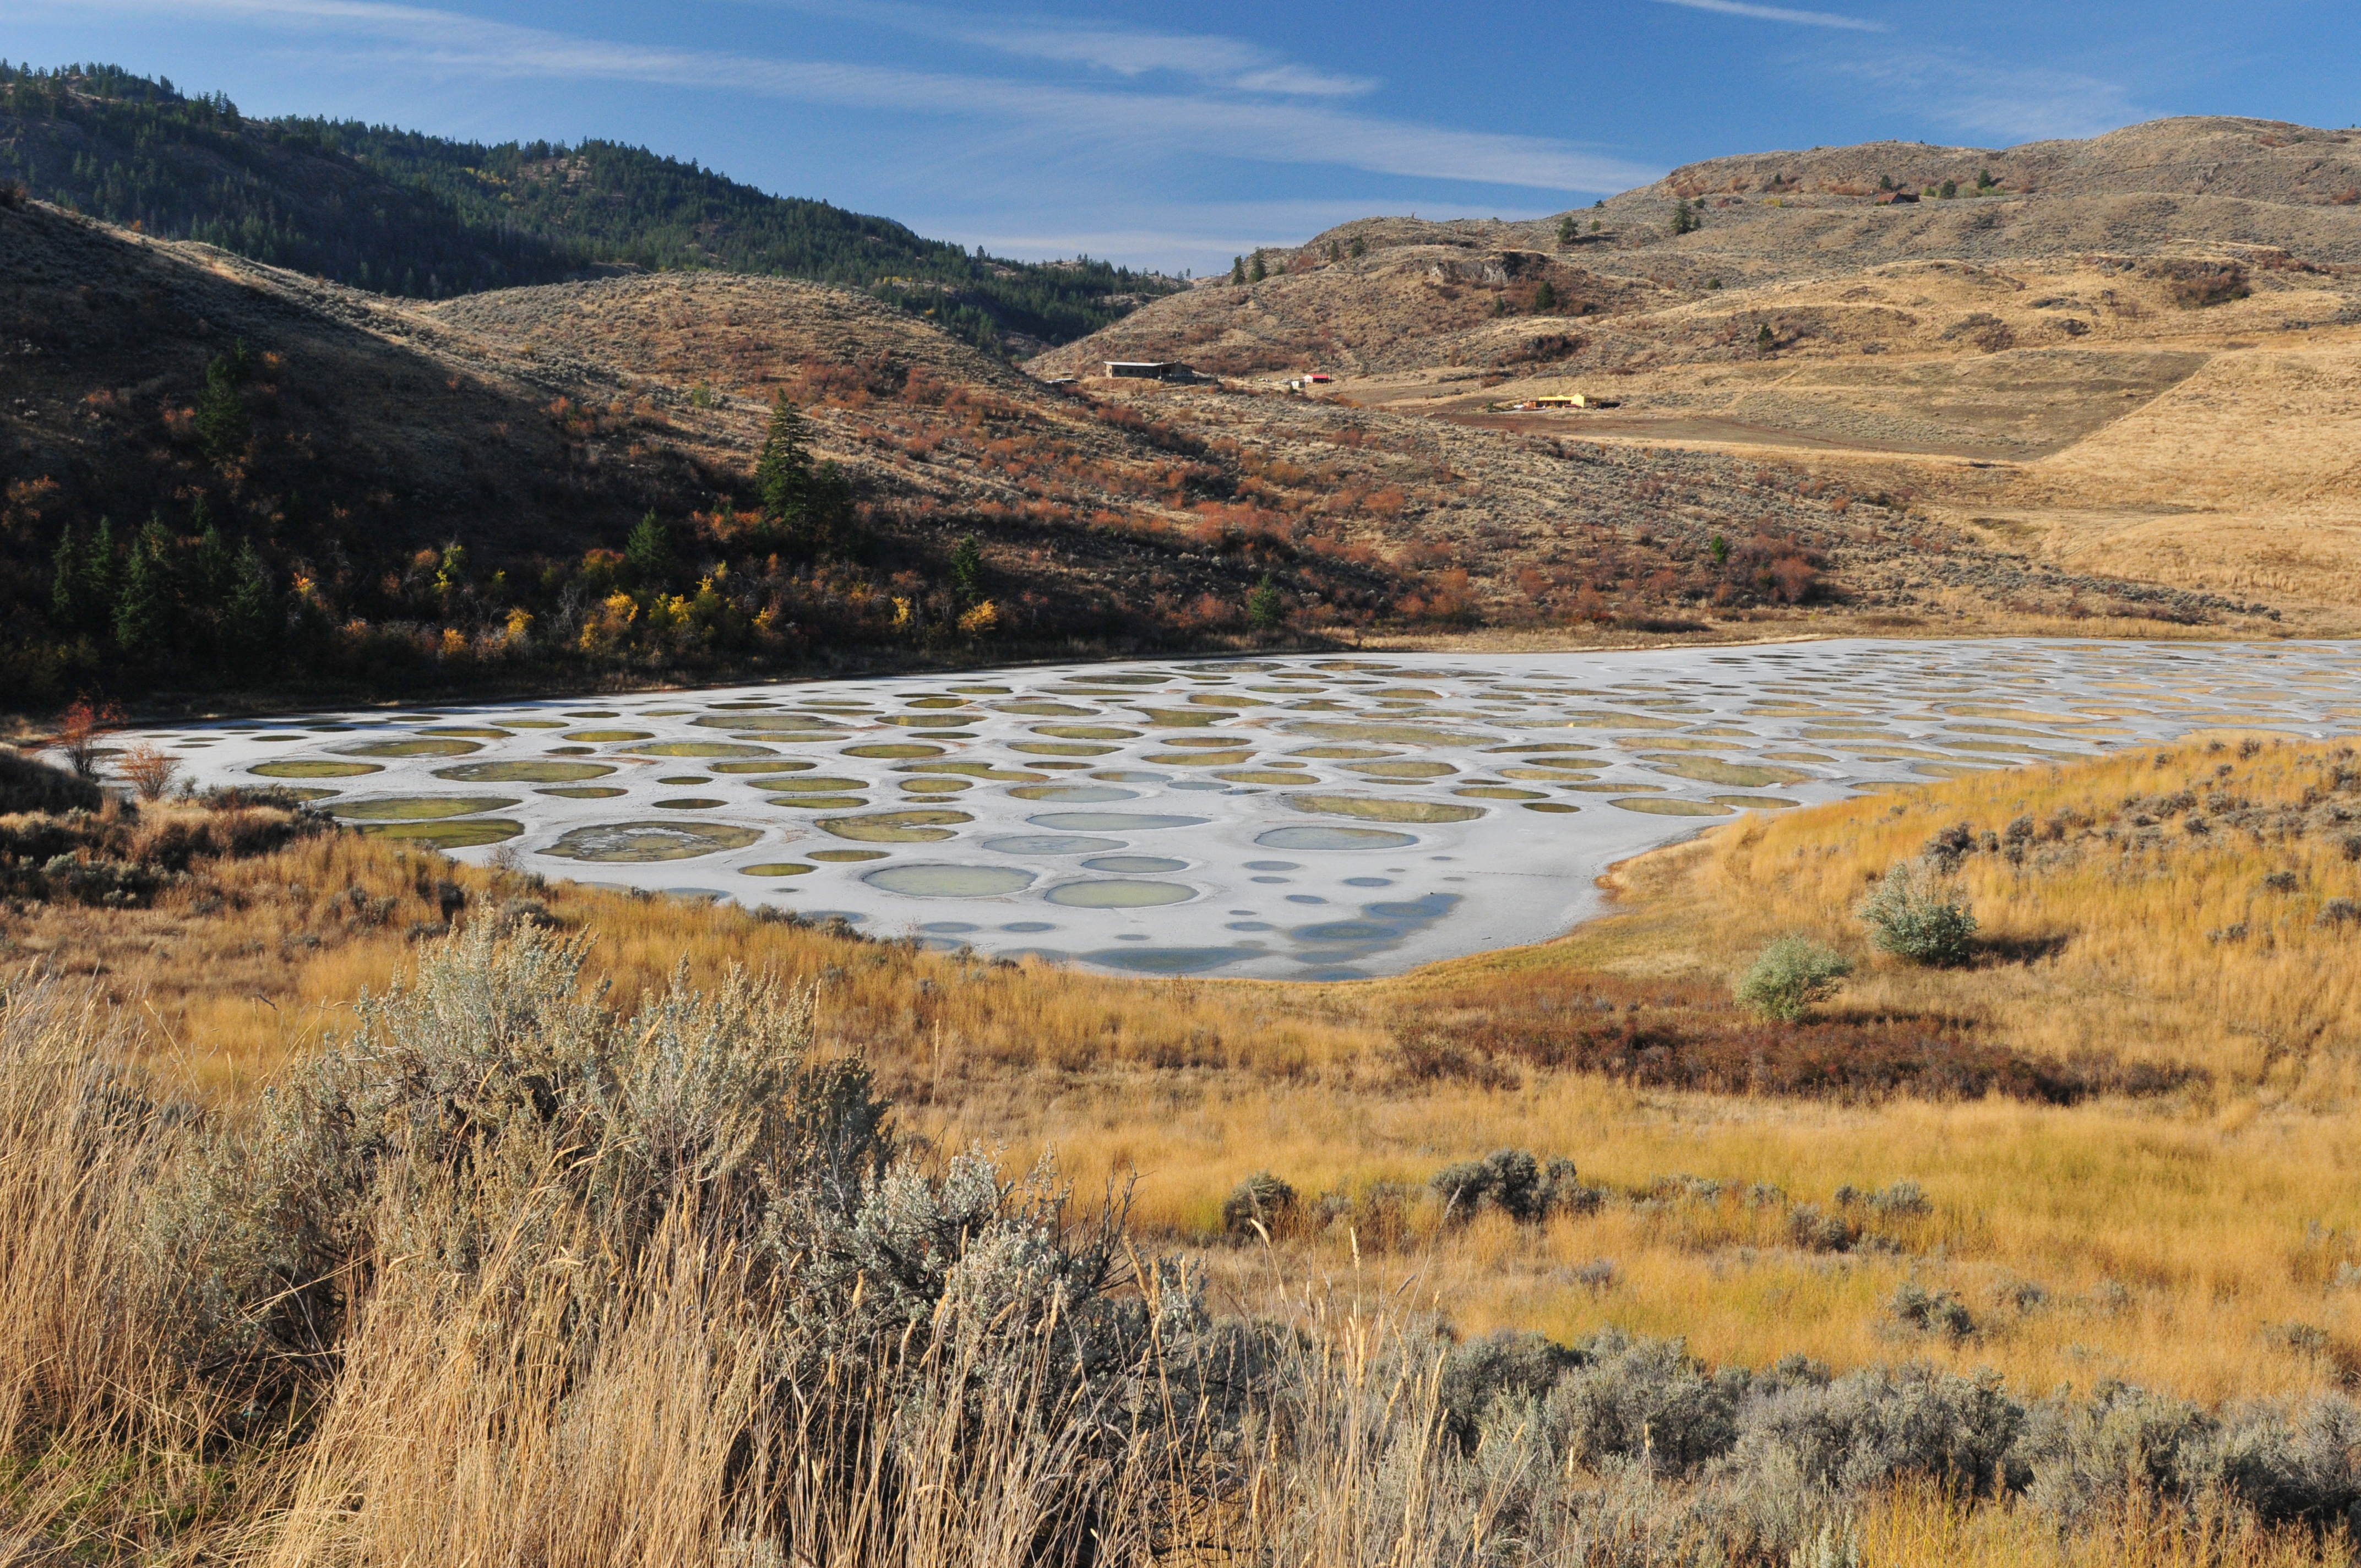 kłlilx'w (Spotted Lake) in Osoyoos BC